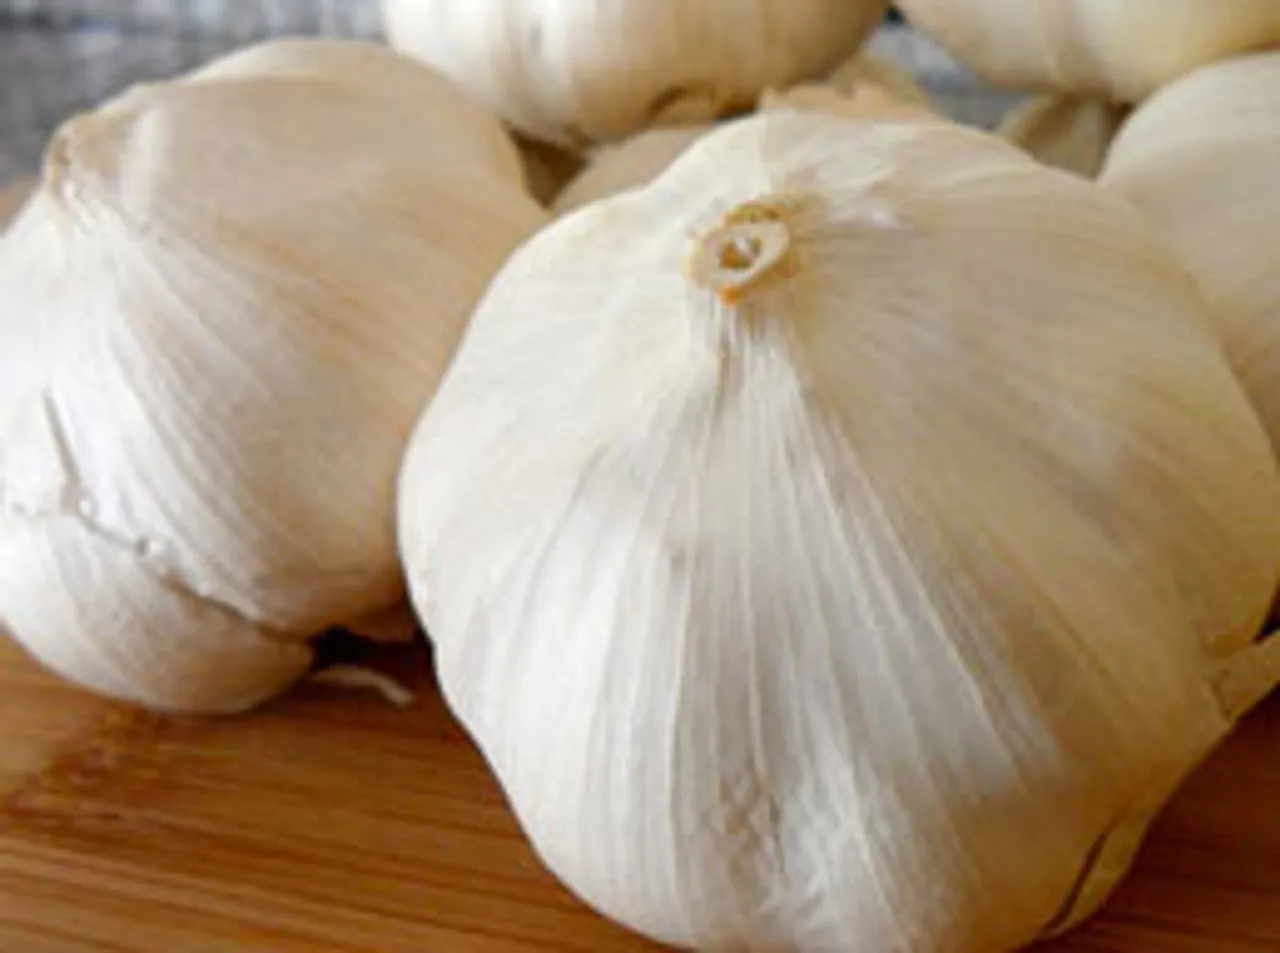 Controlling the strength of garlic